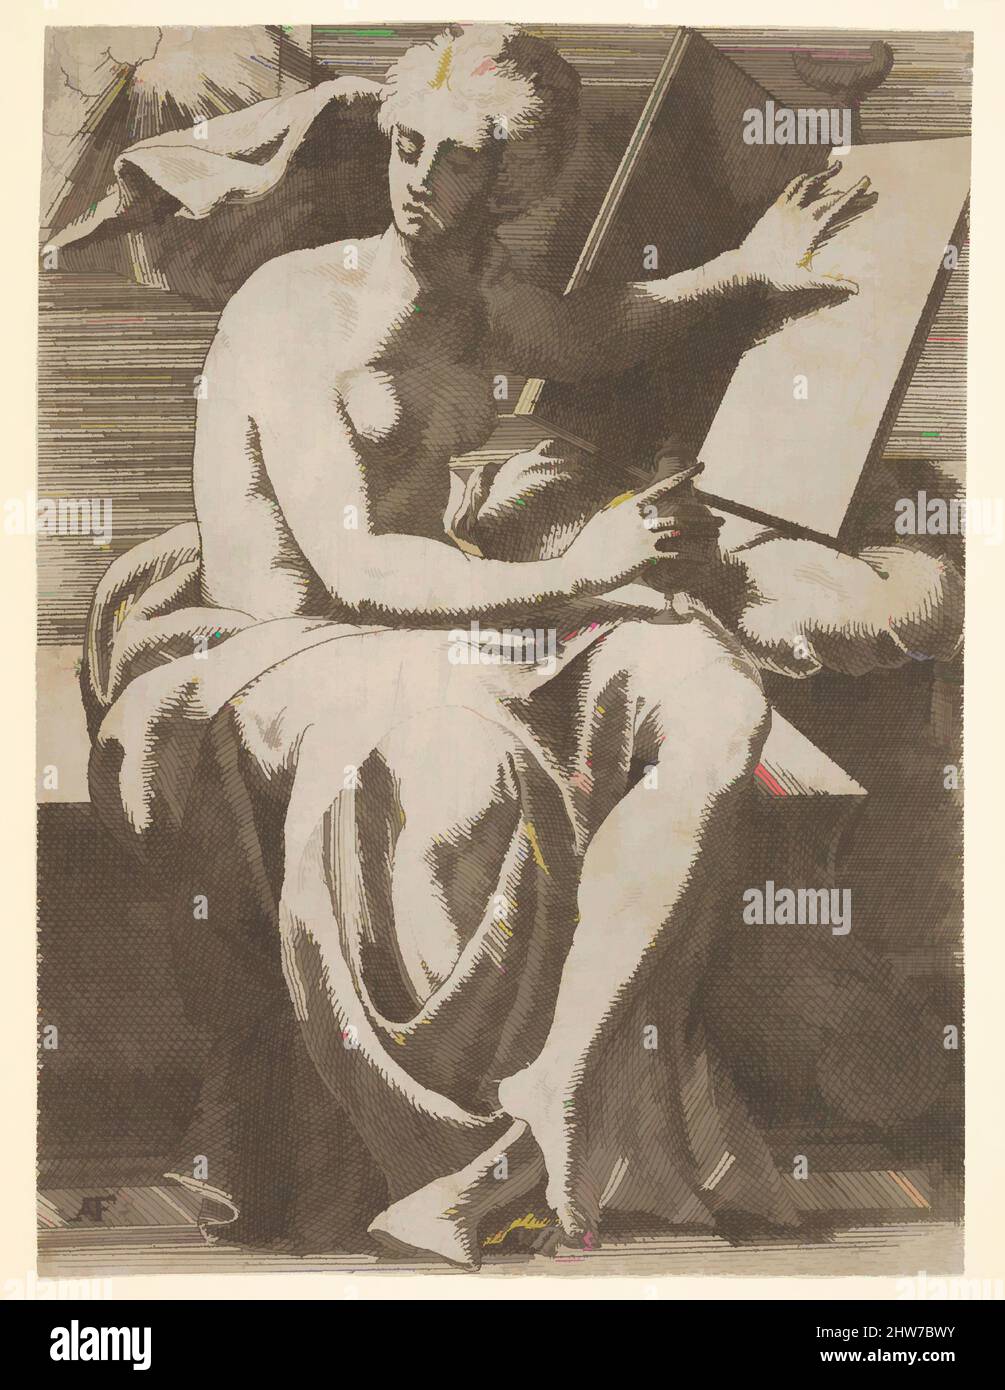 Art inspired by Sibyl seated before an open book upon which she rests her left hand, she twists her face away from the book and holds a vessel in her right hand, Etching, sheet: 8 7/8 x 6 9/16 in. (22.5 x 16.7 cm), Prints, Antonio Fantuzzi (Italian, active France, 1537–45), After, Classic works modernized by Artotop with a splash of modernity. Shapes, color and value, eye-catching visual impact on art. Emotions through freedom of artworks in a contemporary way. A timeless message pursuing a wildly creative new direction. Artists turning to the digital medium and creating the Artotop NFT Stock Photo